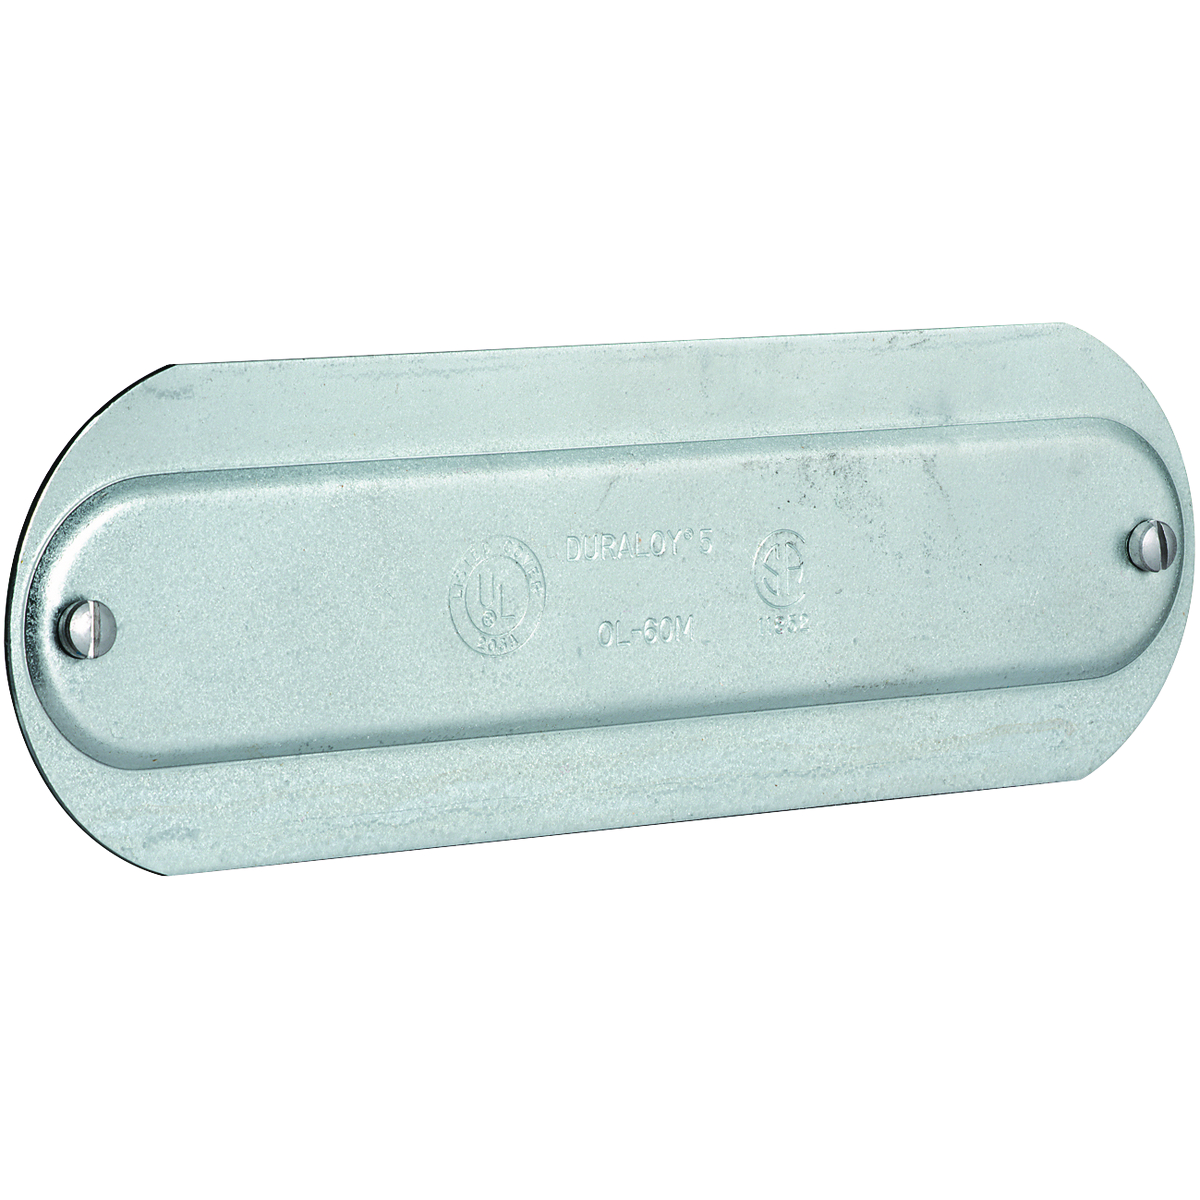 O SERIES/DURALOY 5 SERIES - STEEL STAMPED CONDUIT BODY COVER - HUB SIZE1 INCH